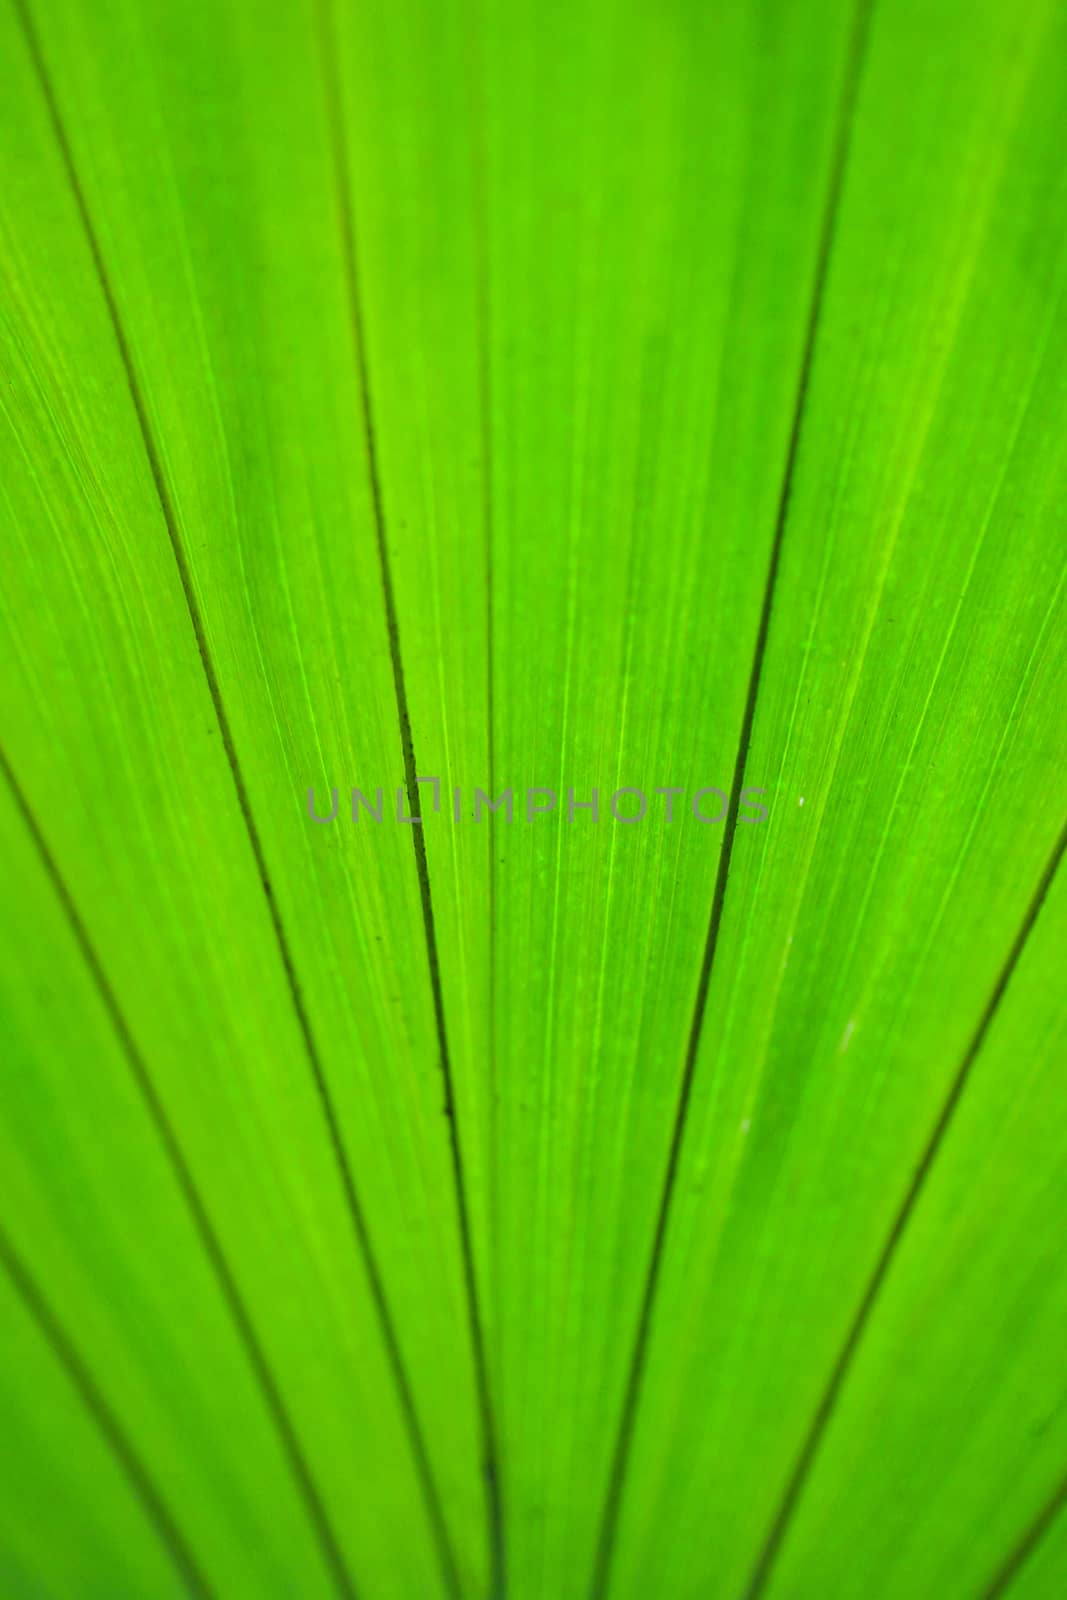 selected focus on green leaves background